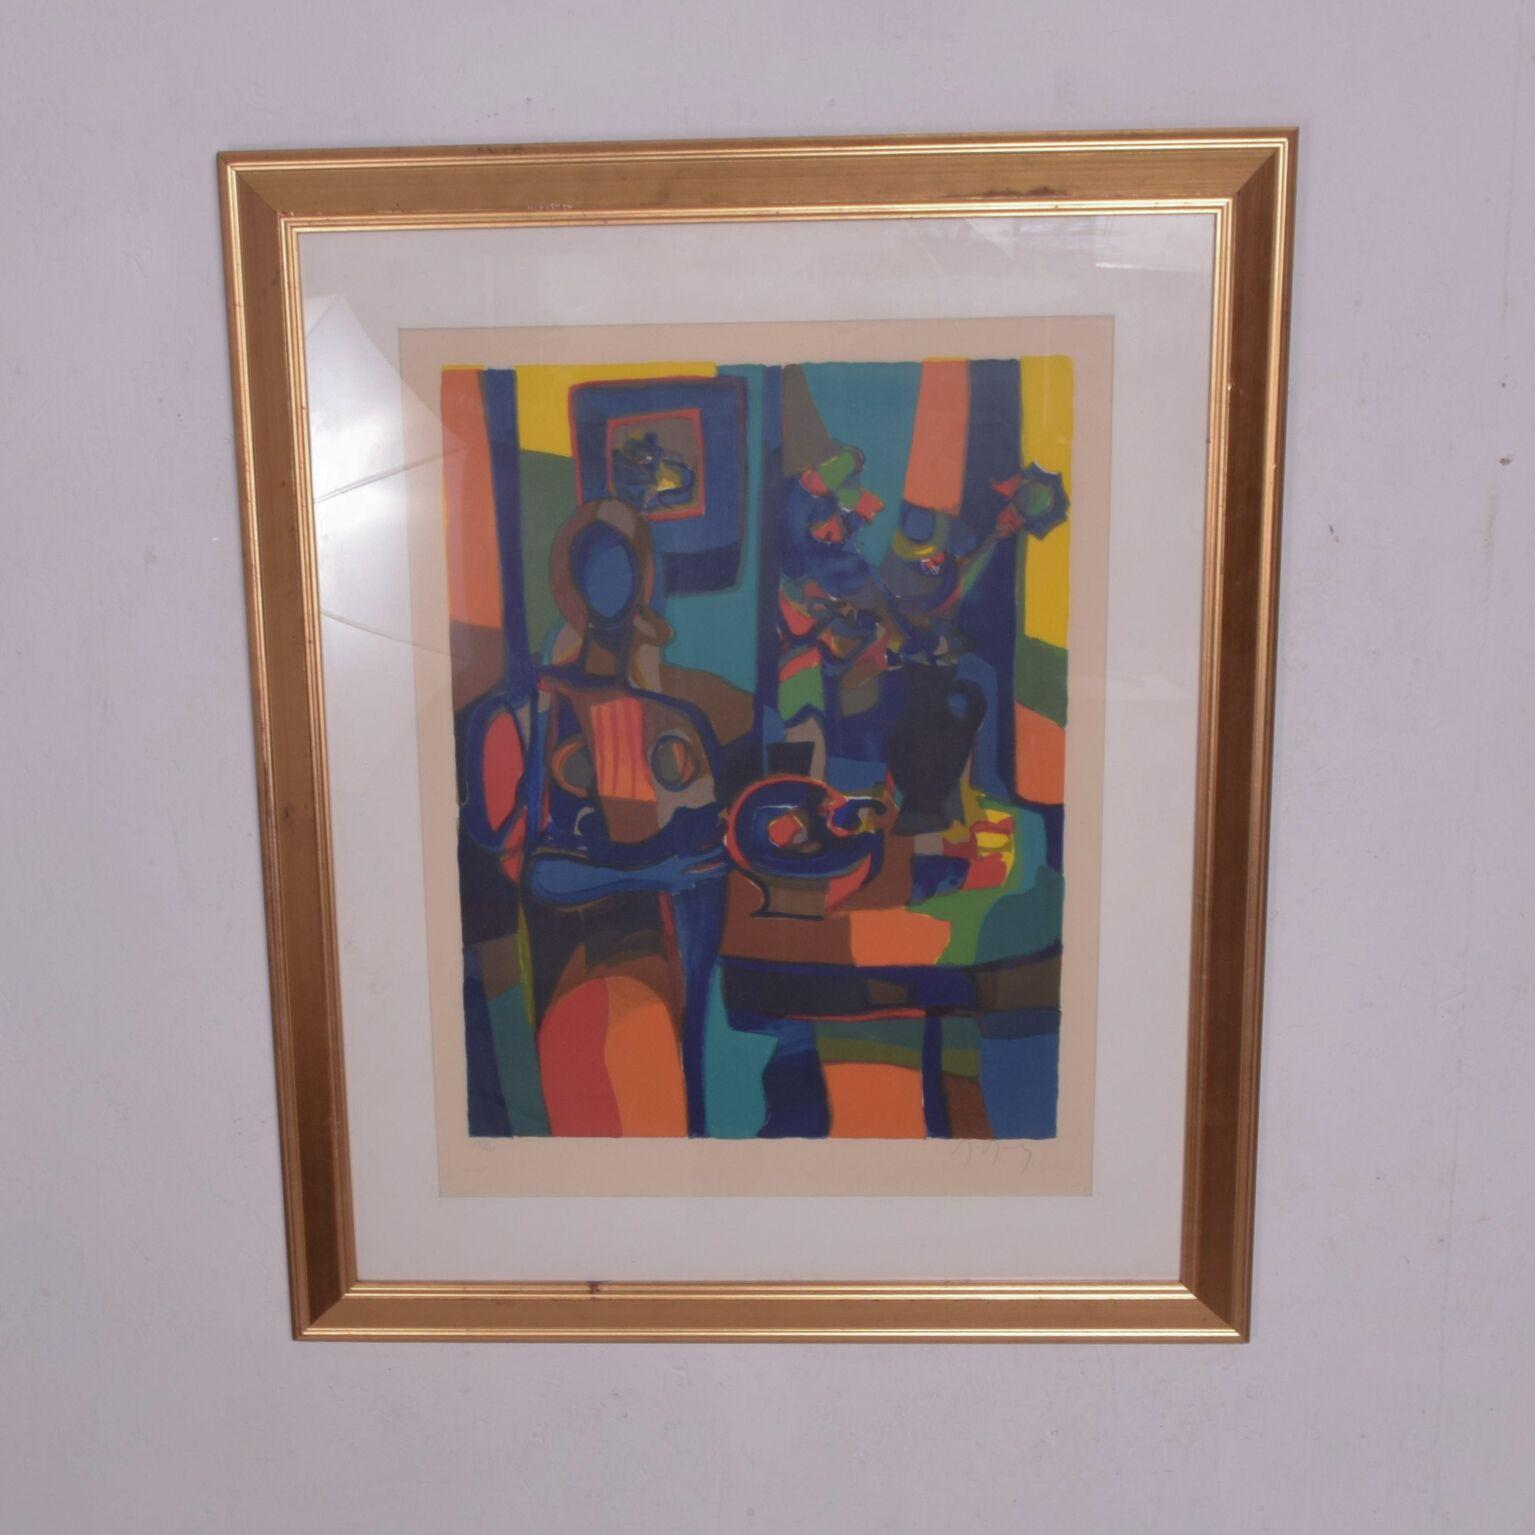 AMBIANIC presents
Mid Century Modern Abstract Art Still Life Lithograph 
Beautiful Vibrant color Mid Century Modern art
This beautiful work is signed by Marcel Mouly listed French Artist.
Dimensions:  30